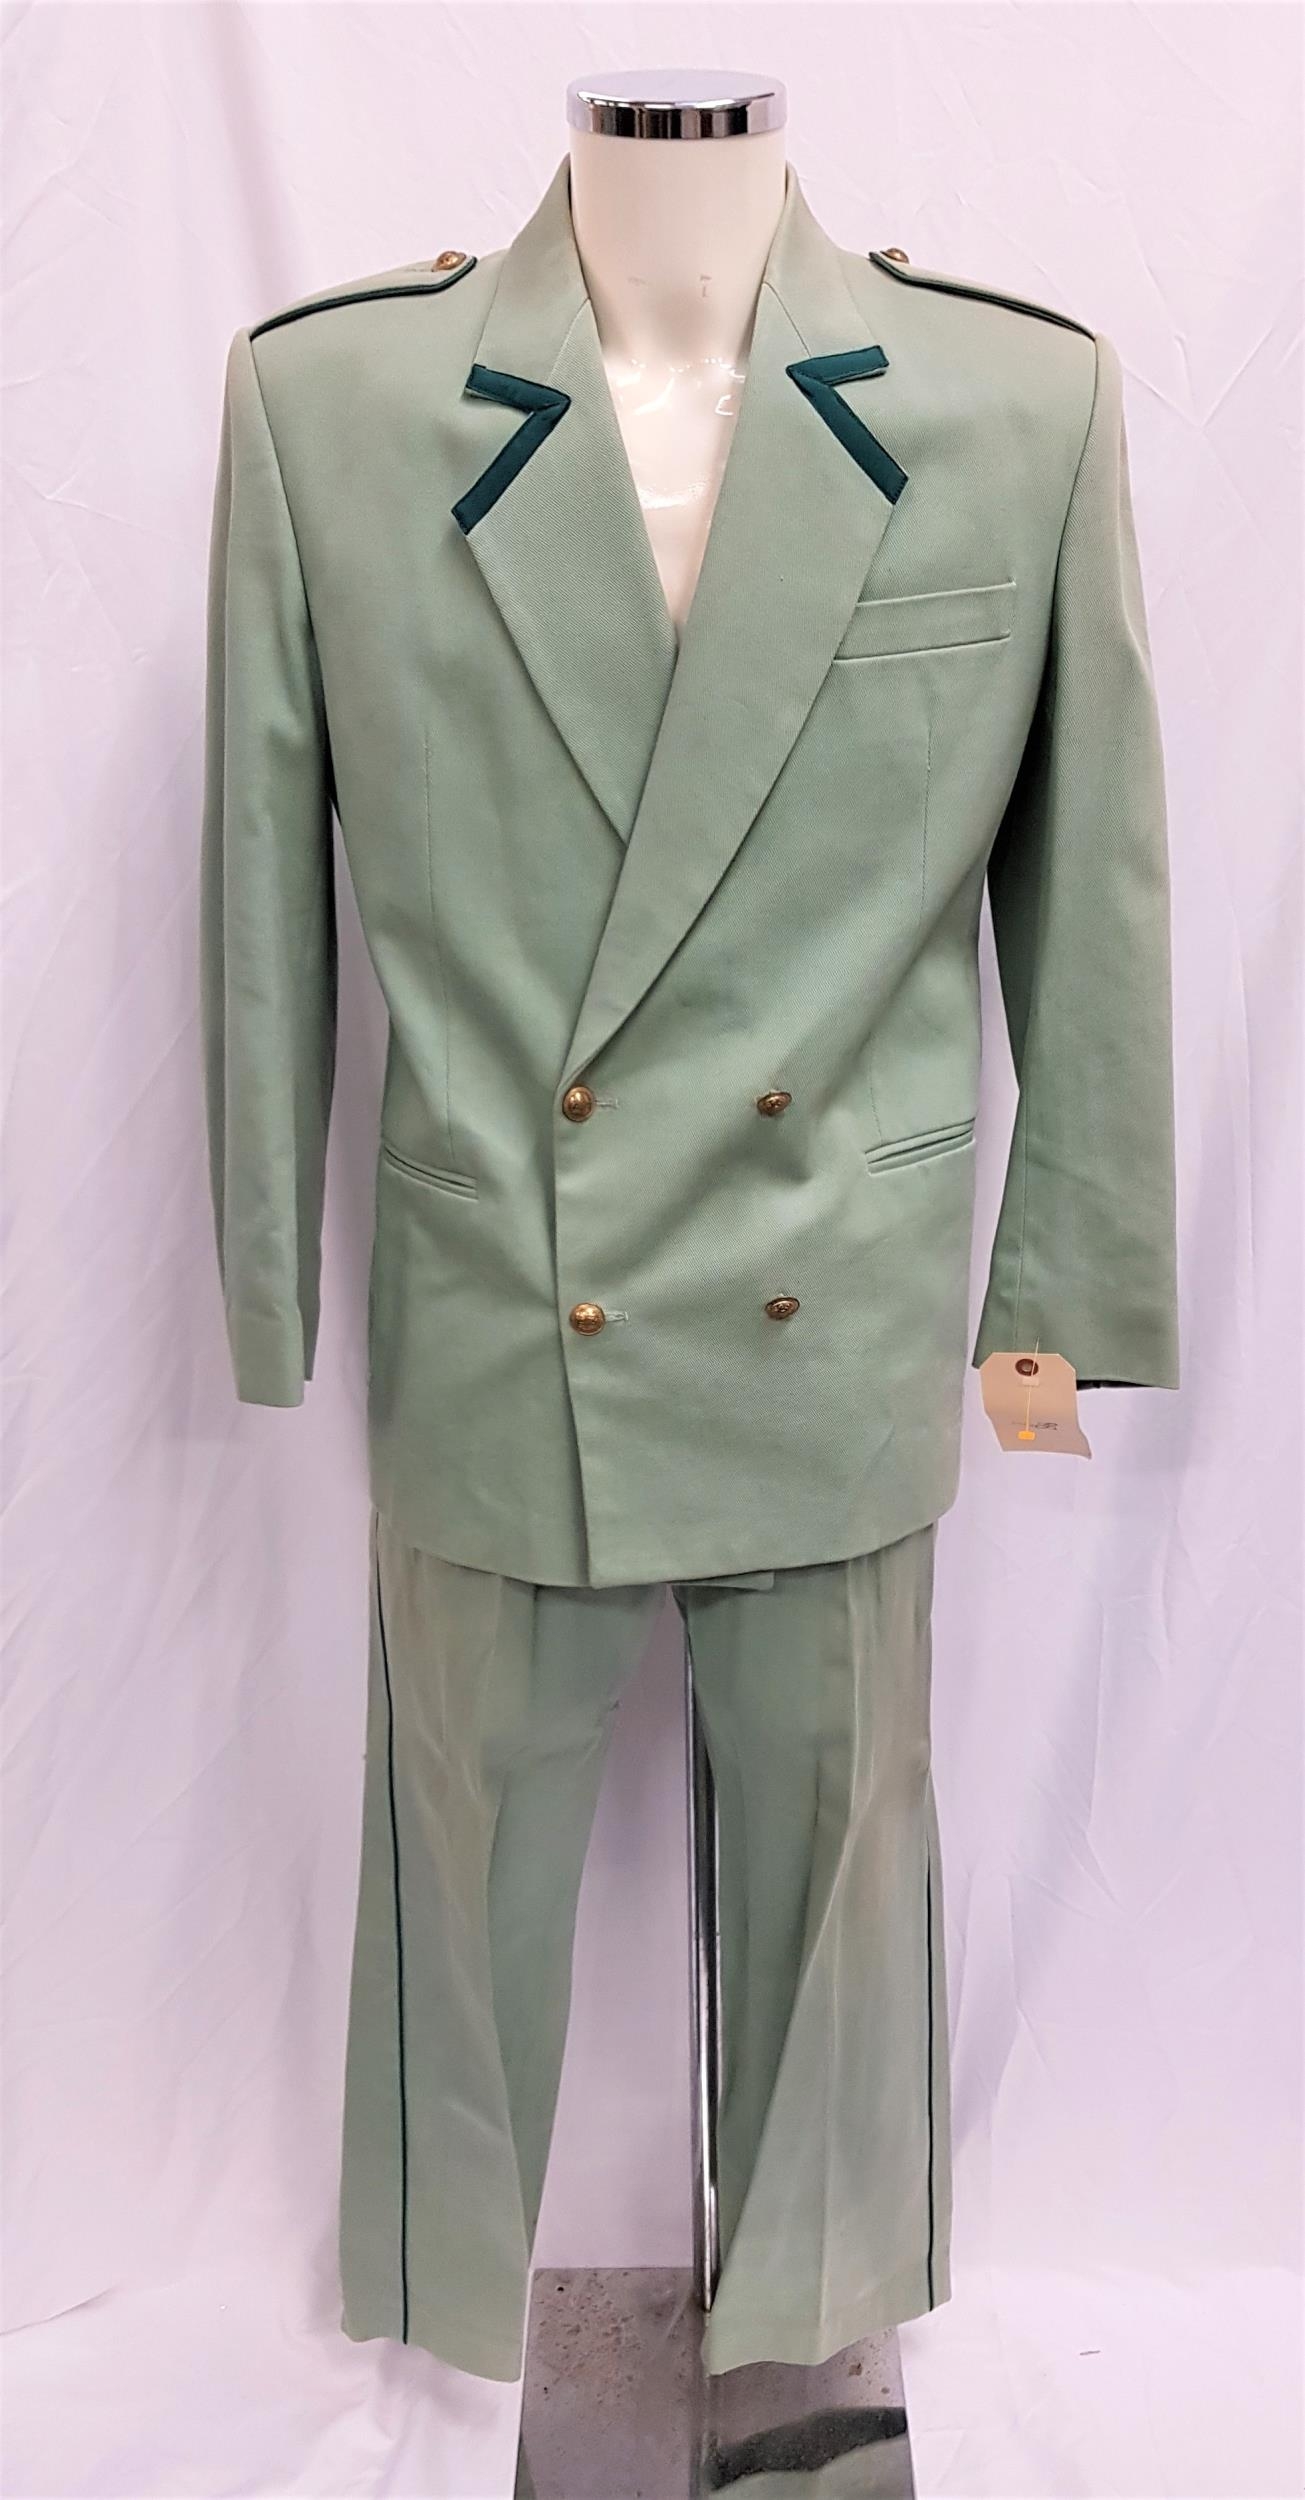 GHOST SHIP (2002) - TWO PIECE GREEN SUIT Gents mint green canvas uniform, the double breasted jacket